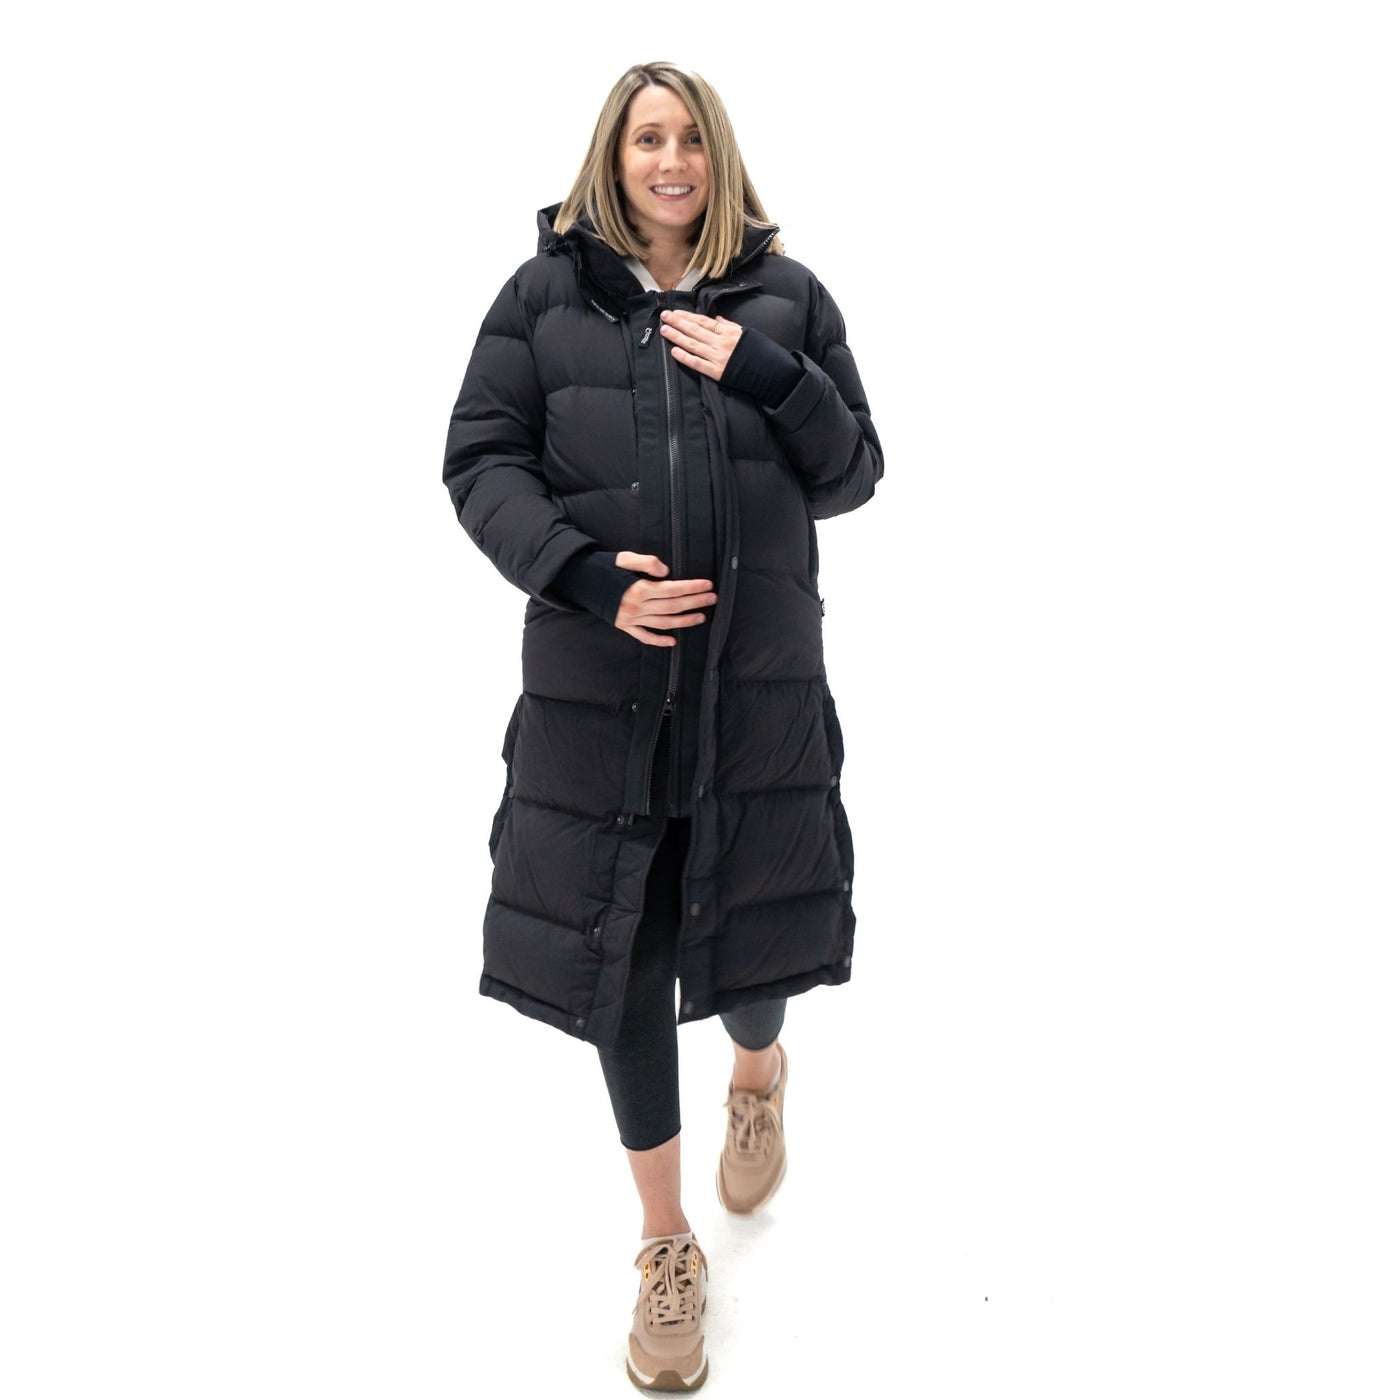 BellyCoat - Maternity Jacket Extender for Expectant Mothers - Can be used  interchangeably between jackets you already own!